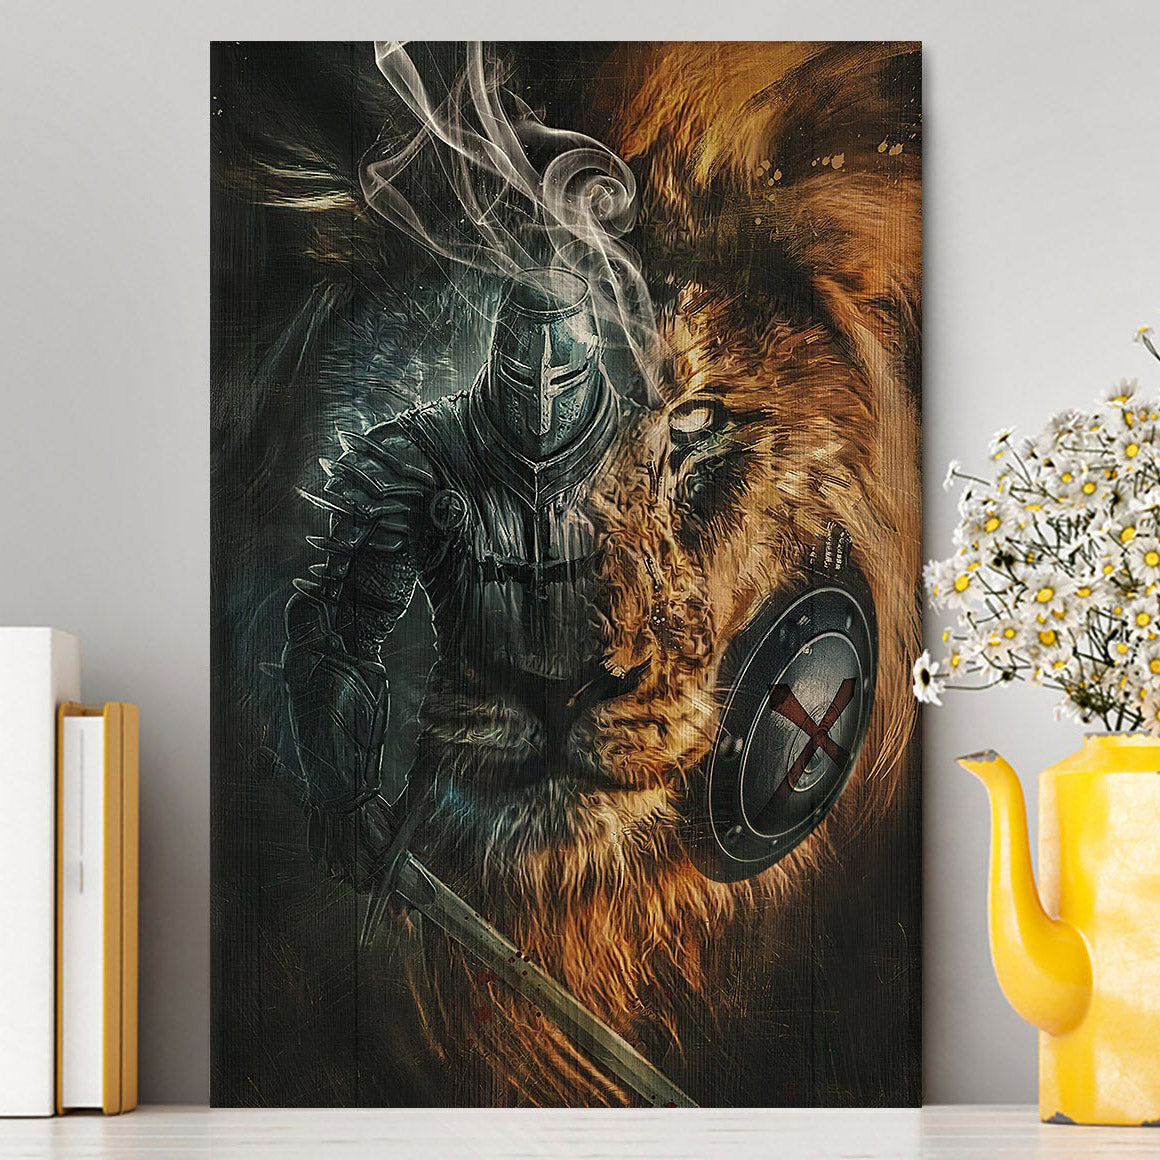 Awesome Warrior And Lion Canvas Wall Art - Christian Home Decor - Religious Art